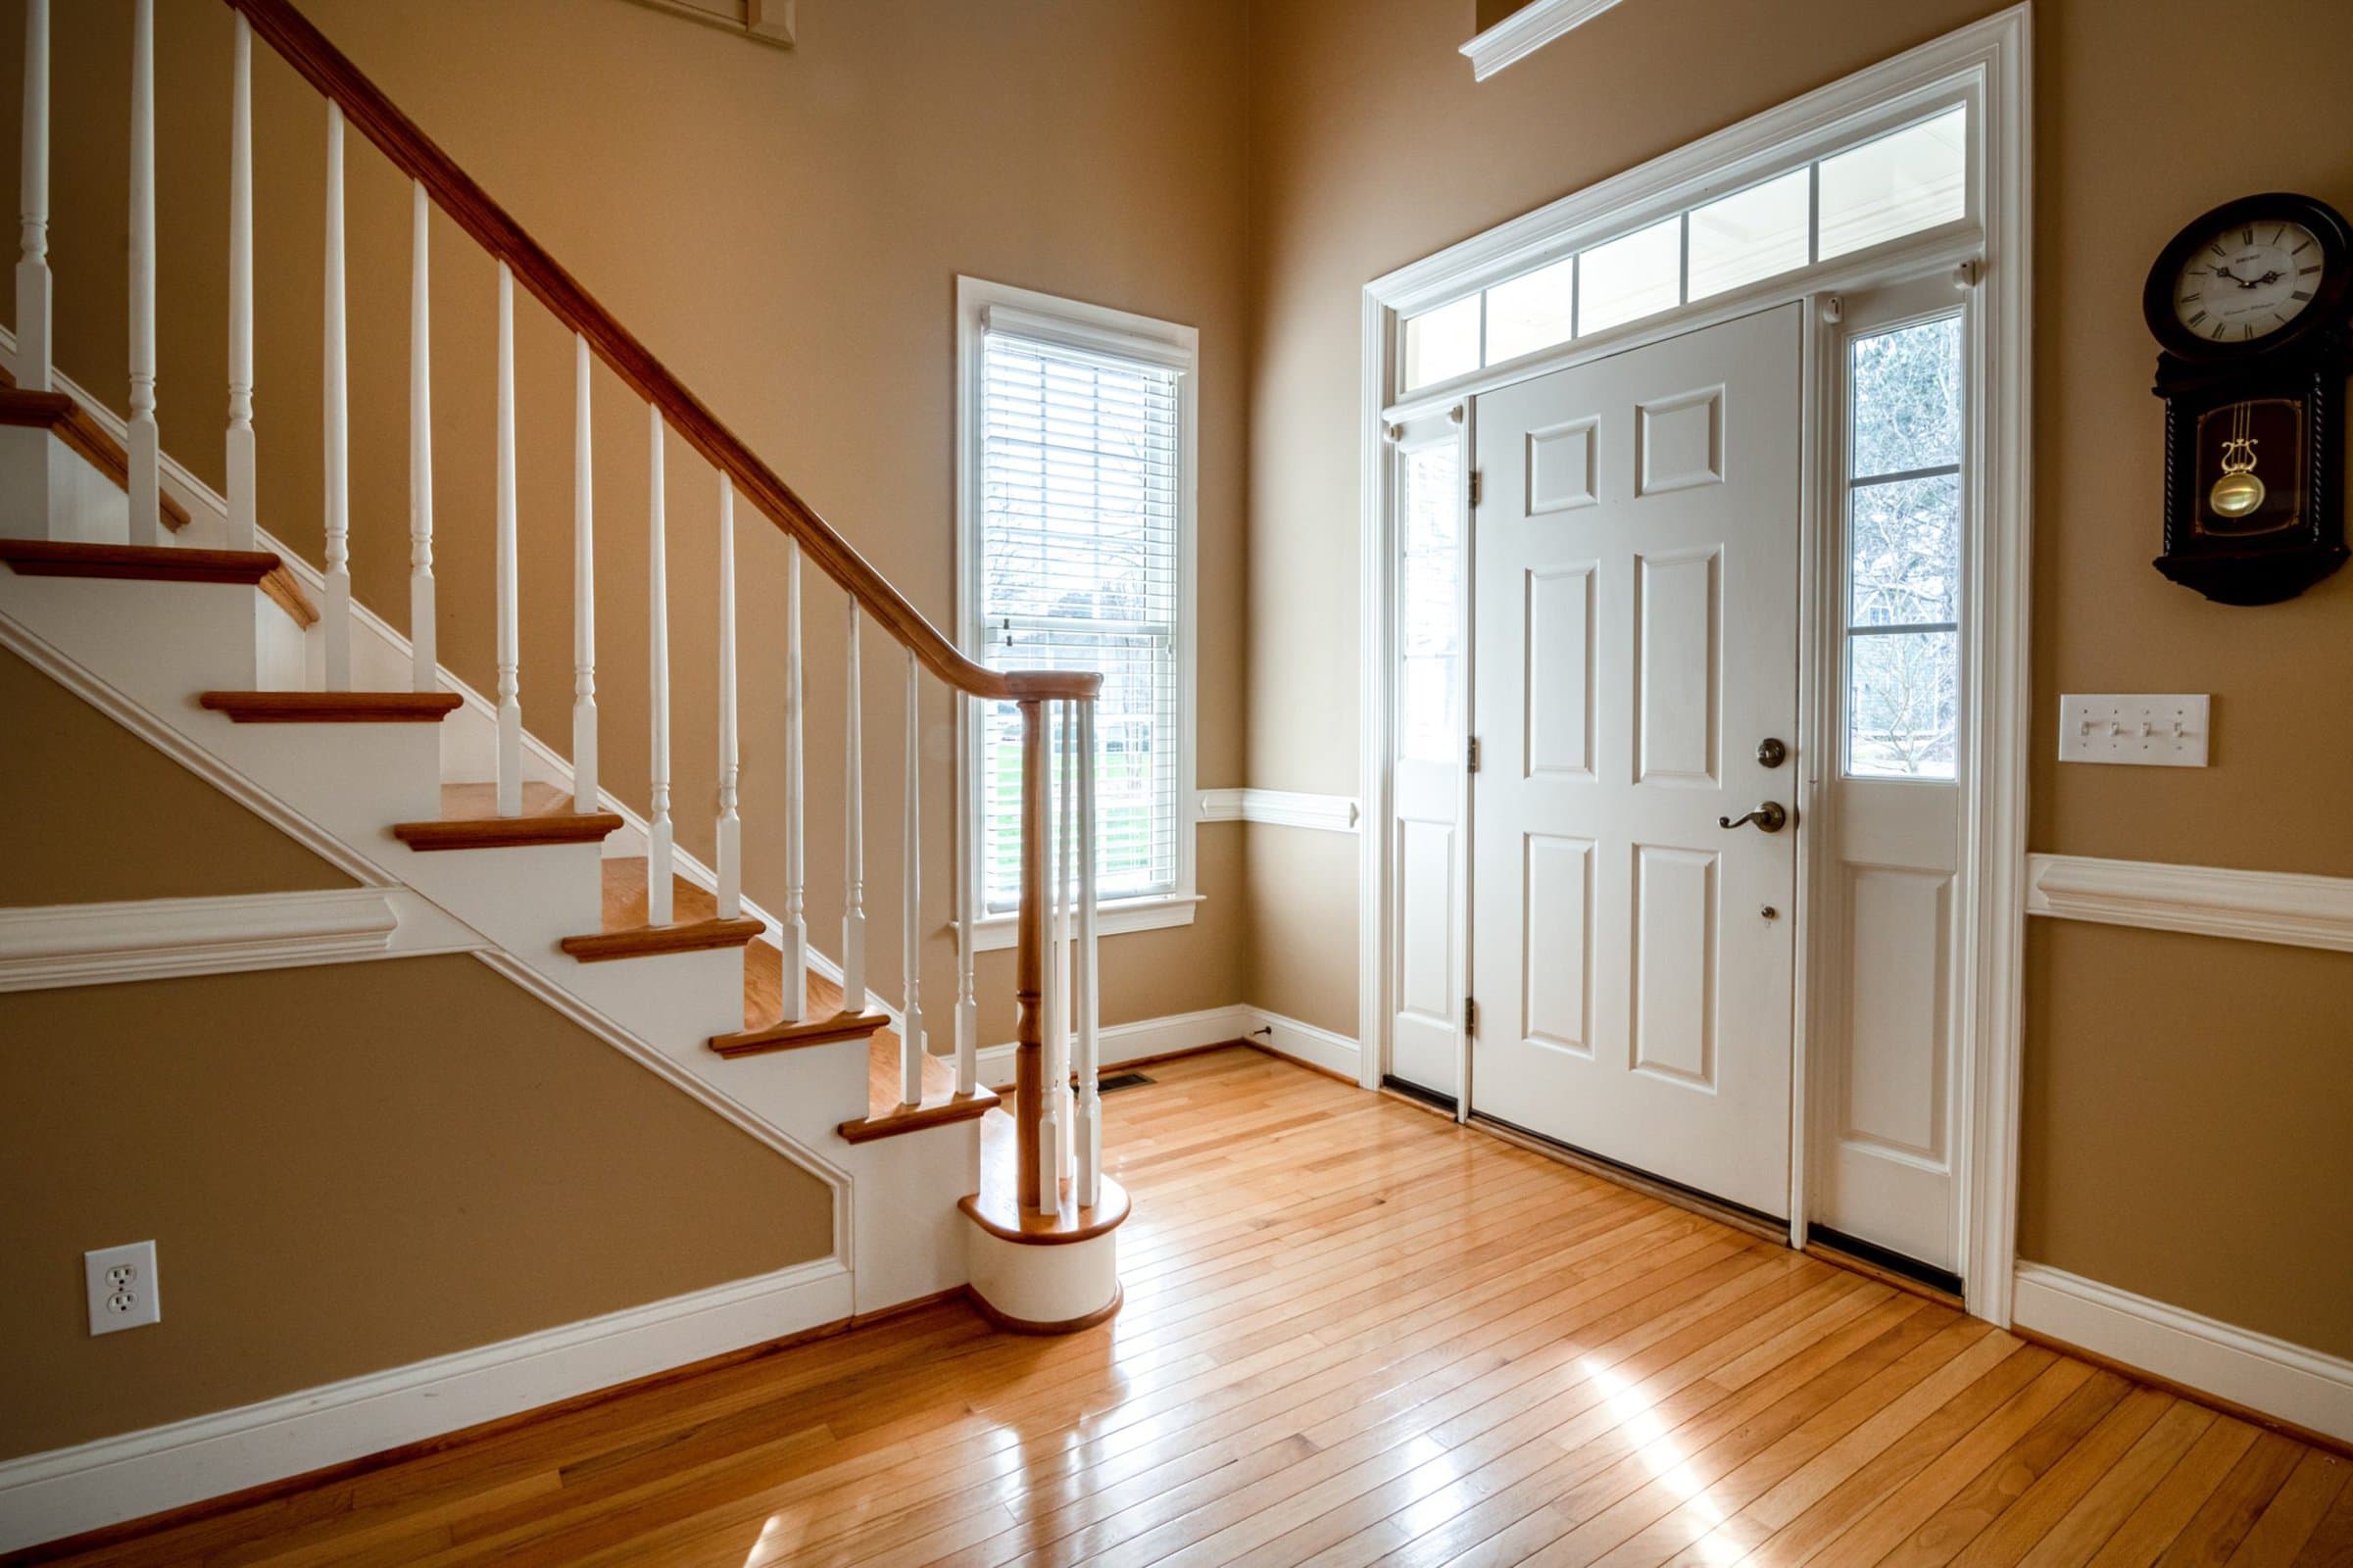  Should You Get a Wider Hallway scaled